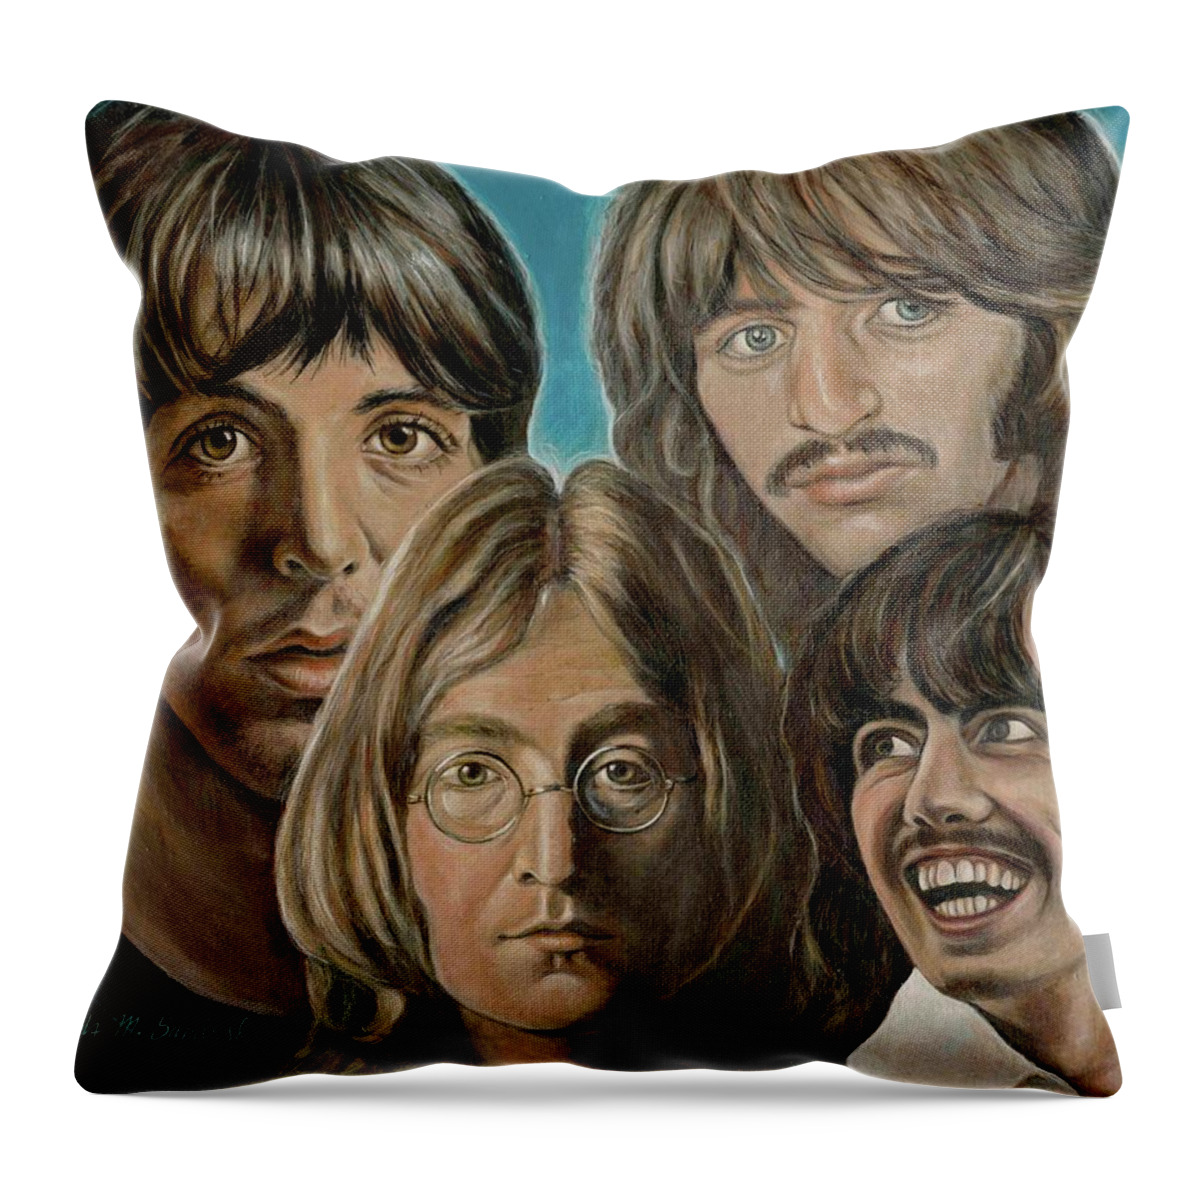 Beatles Throw Pillow featuring the painting Beatles The Fab Four by Melinda Saminski